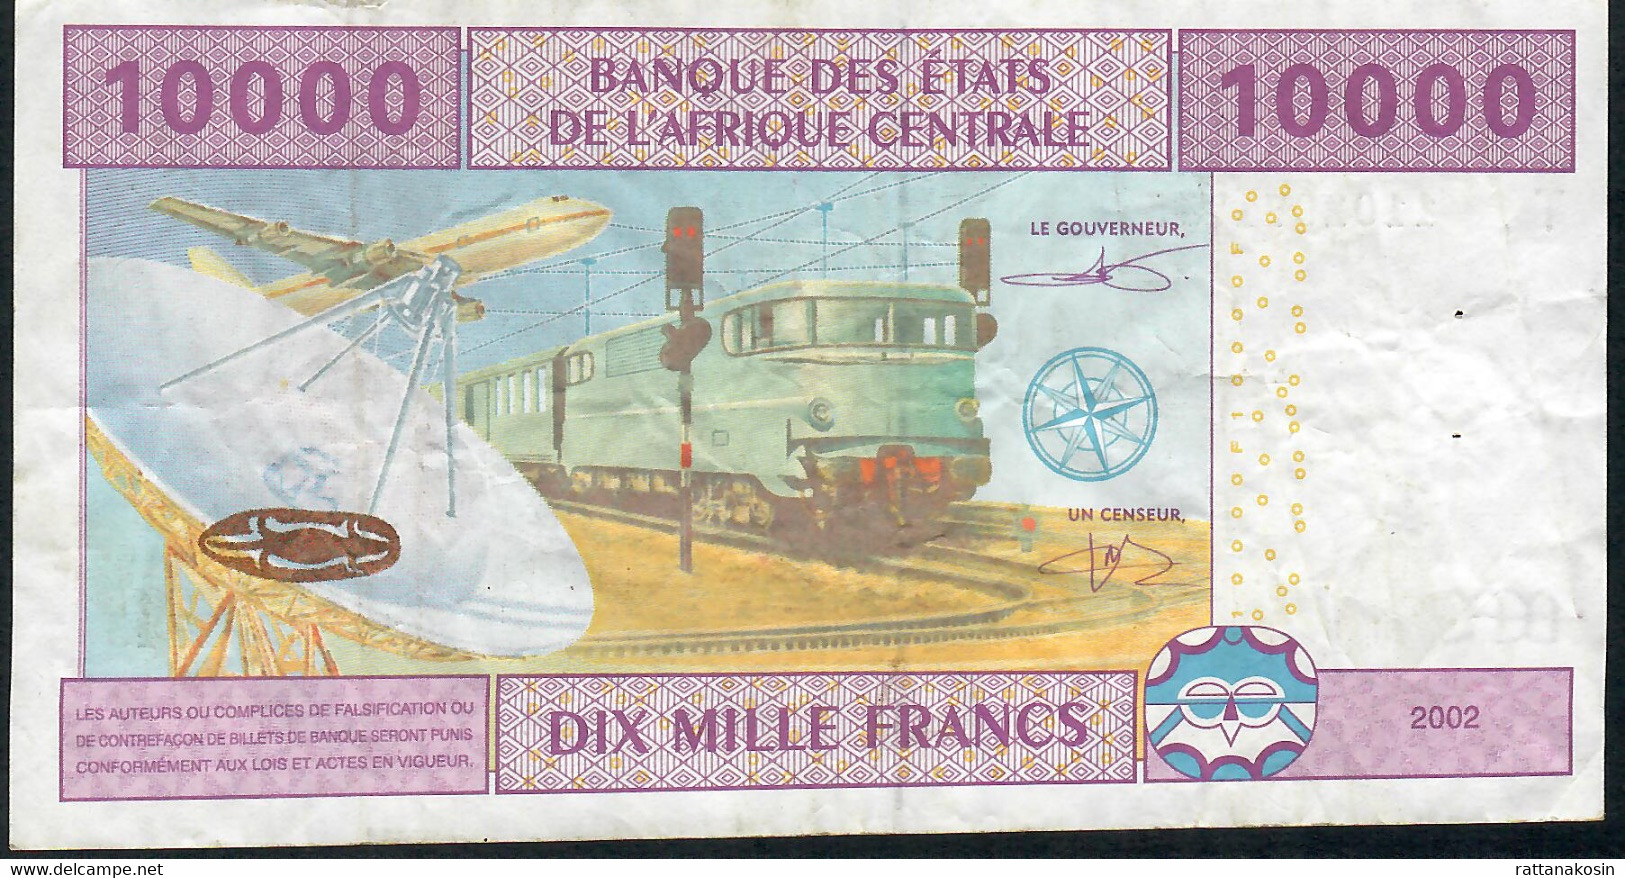 C.A.S. CONGO LETTER T P110Tc  10000 Or 10.000 FRANCS 2002 SIGNATURE 11  F-VF 2 P.h. - Centraal-Afrikaanse Staten